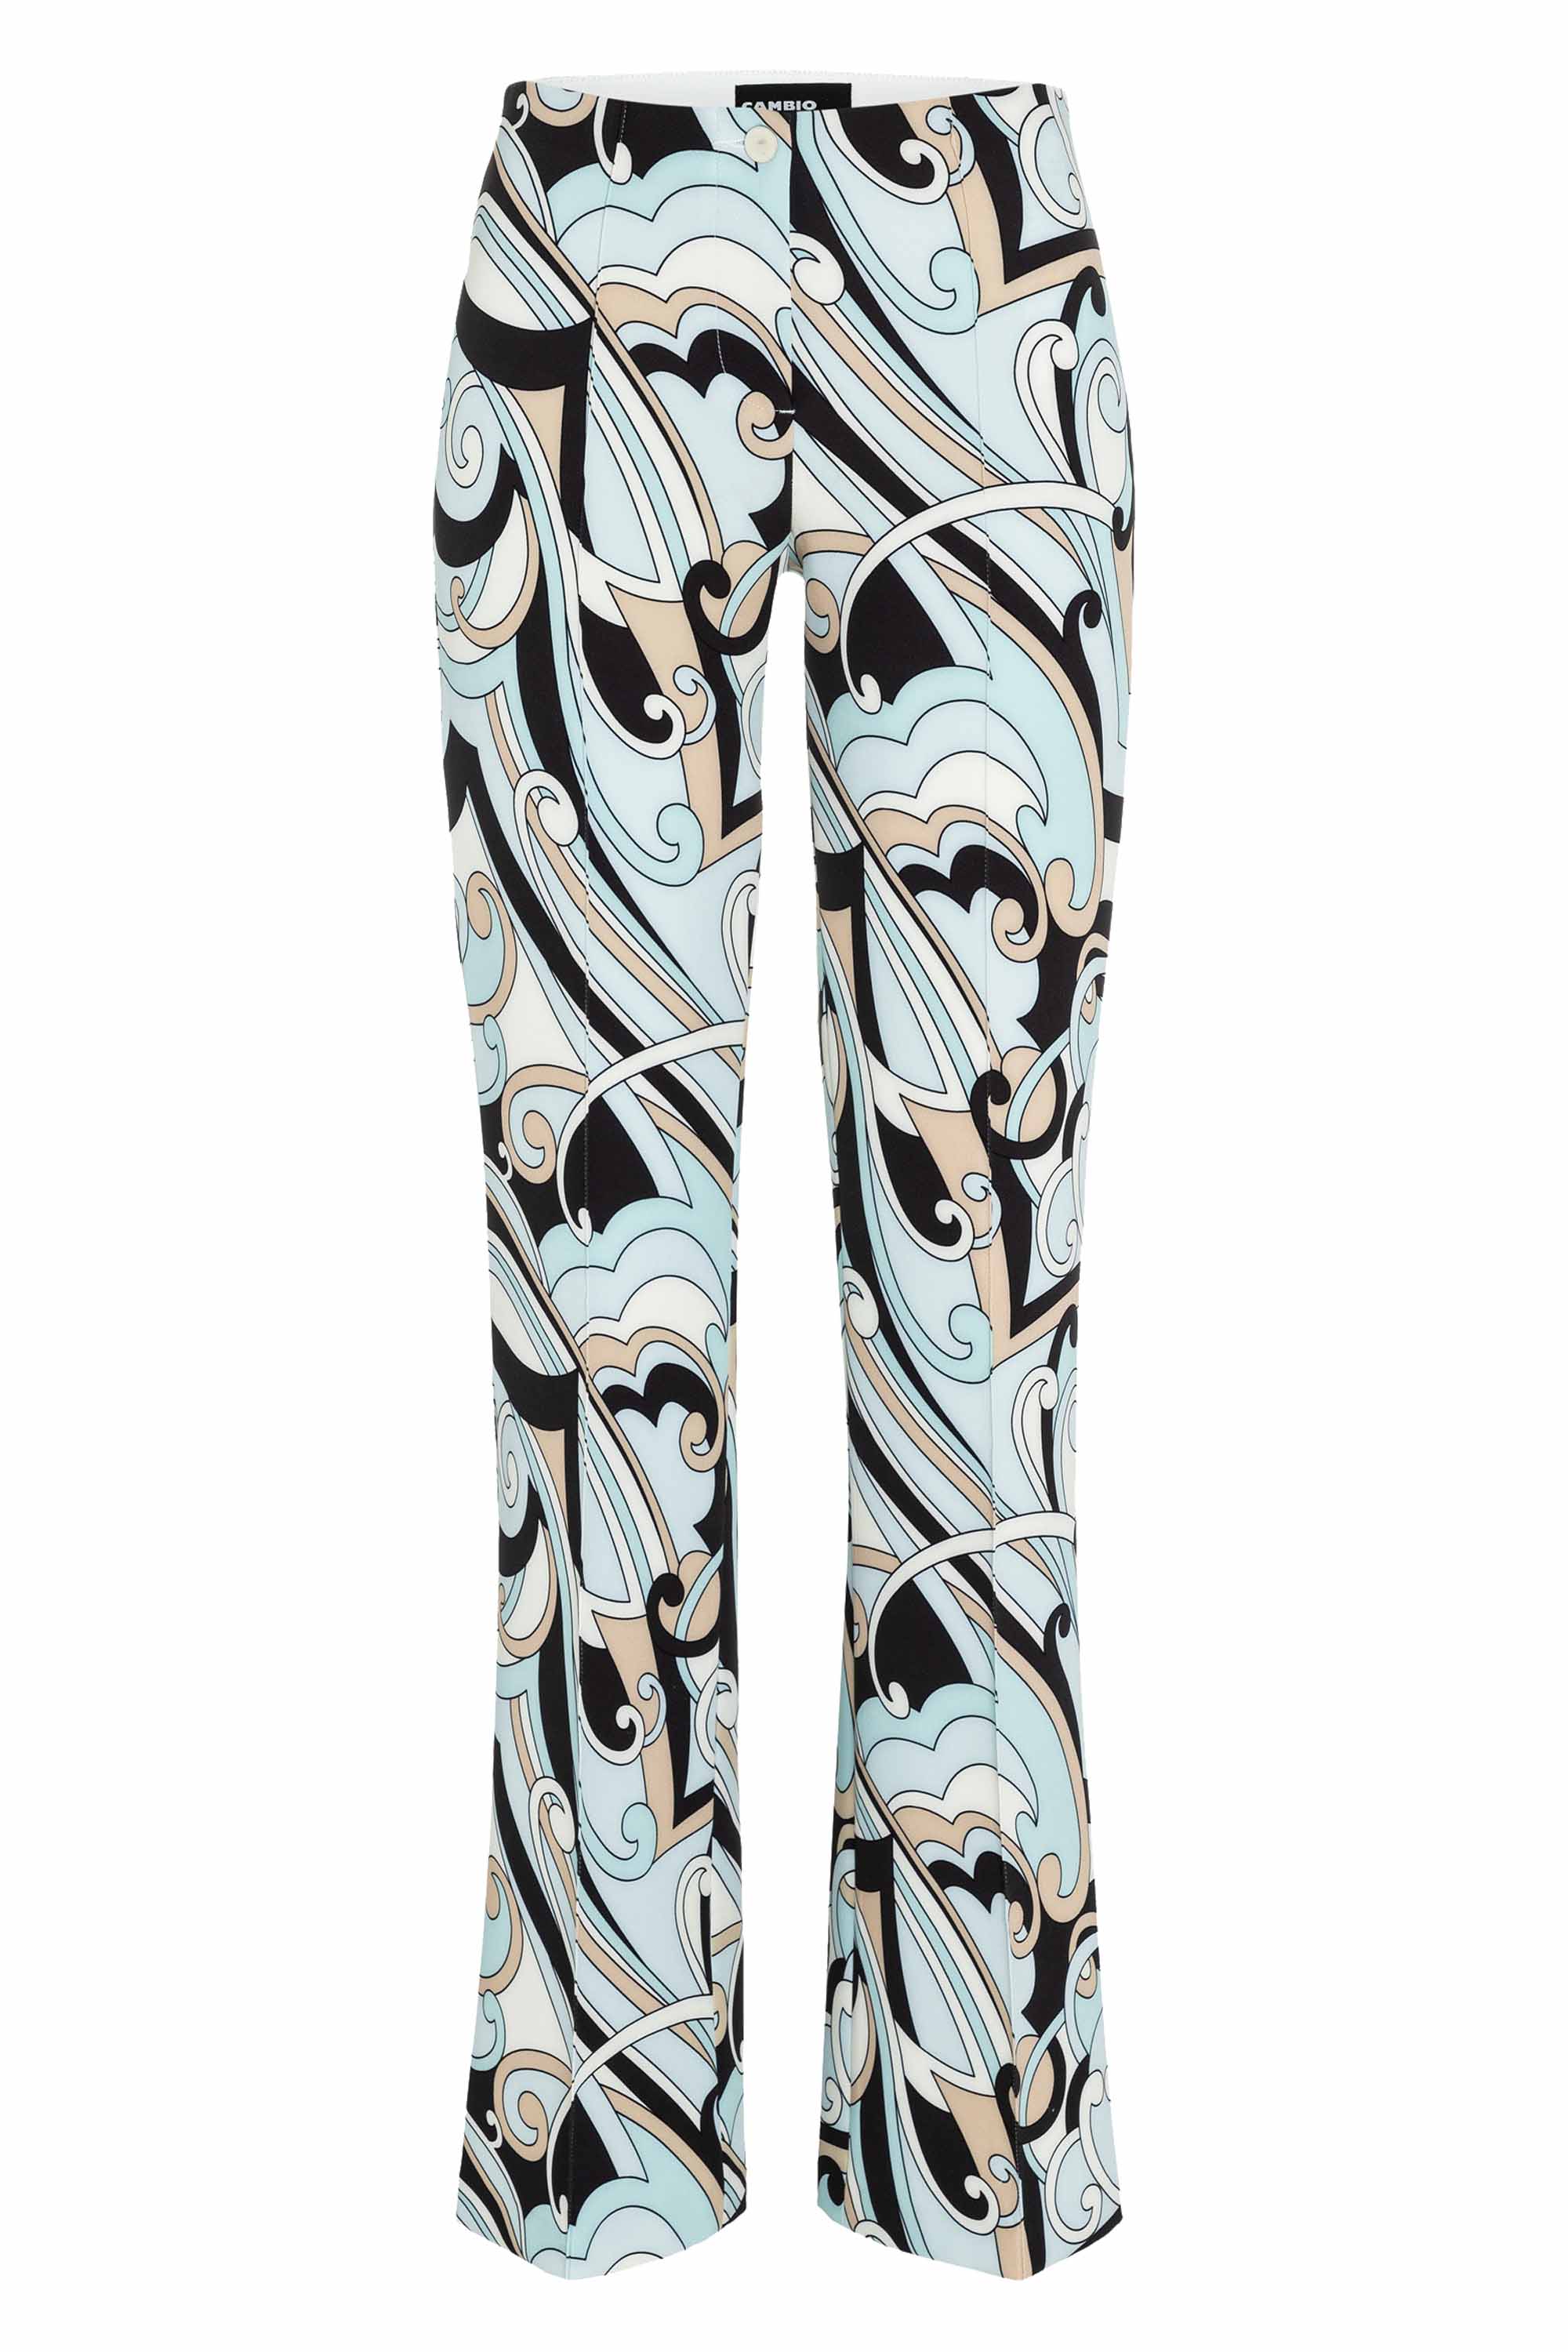 Cambio trousers ROS Blue by Penninkhoffashion.com